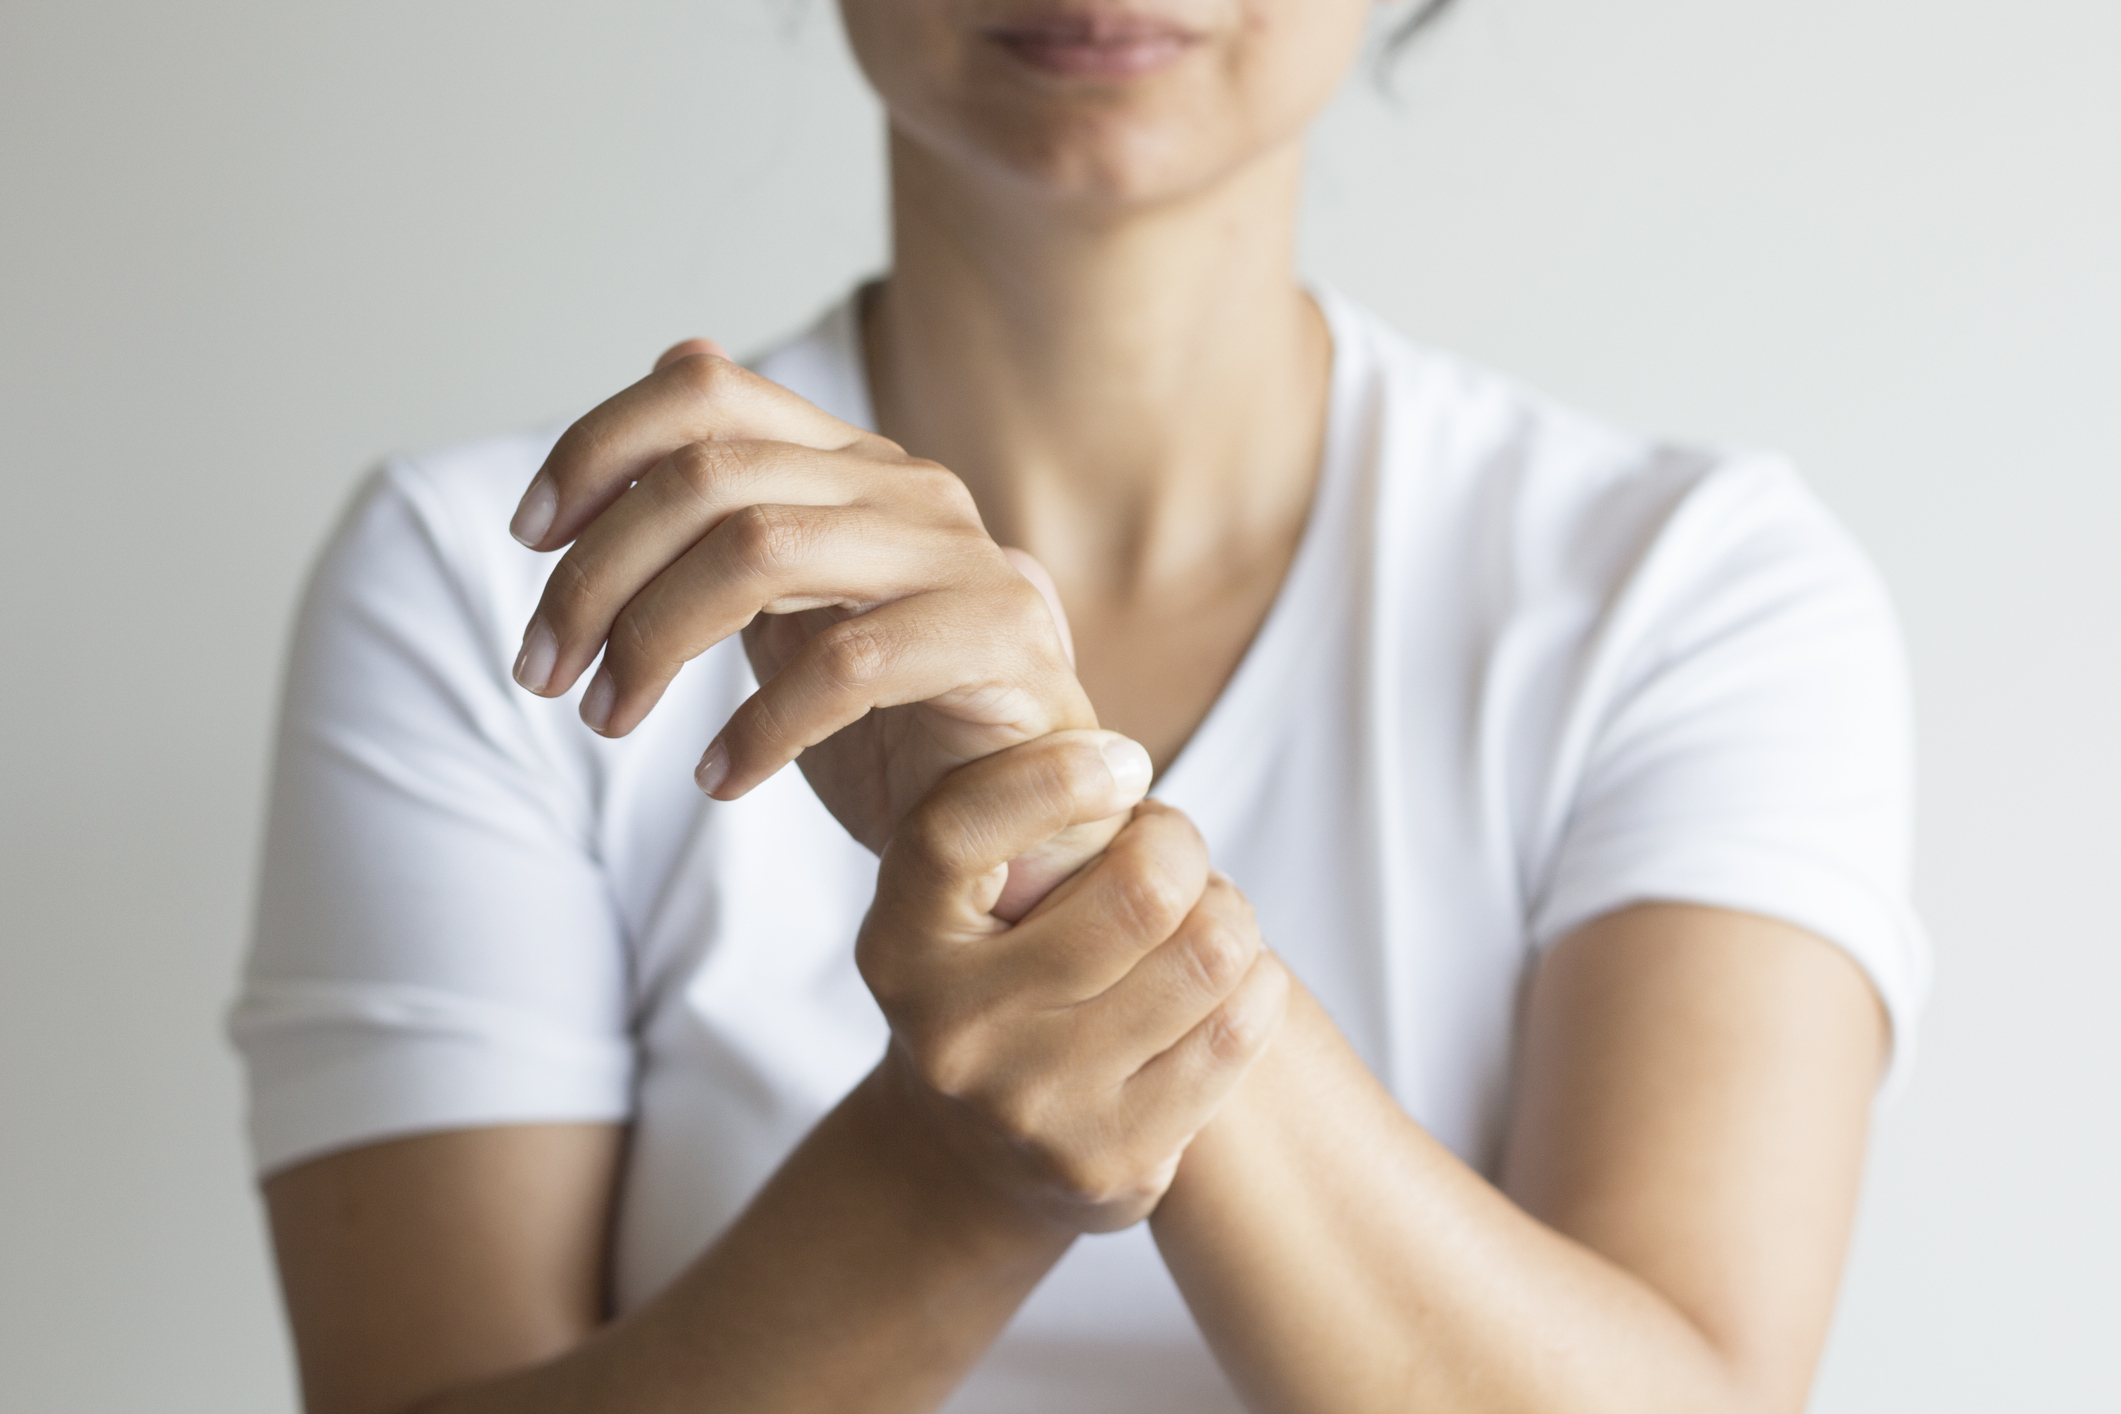 What are the Symptoms of Numbness in Hands and the Treatment for Numbness in Hands?